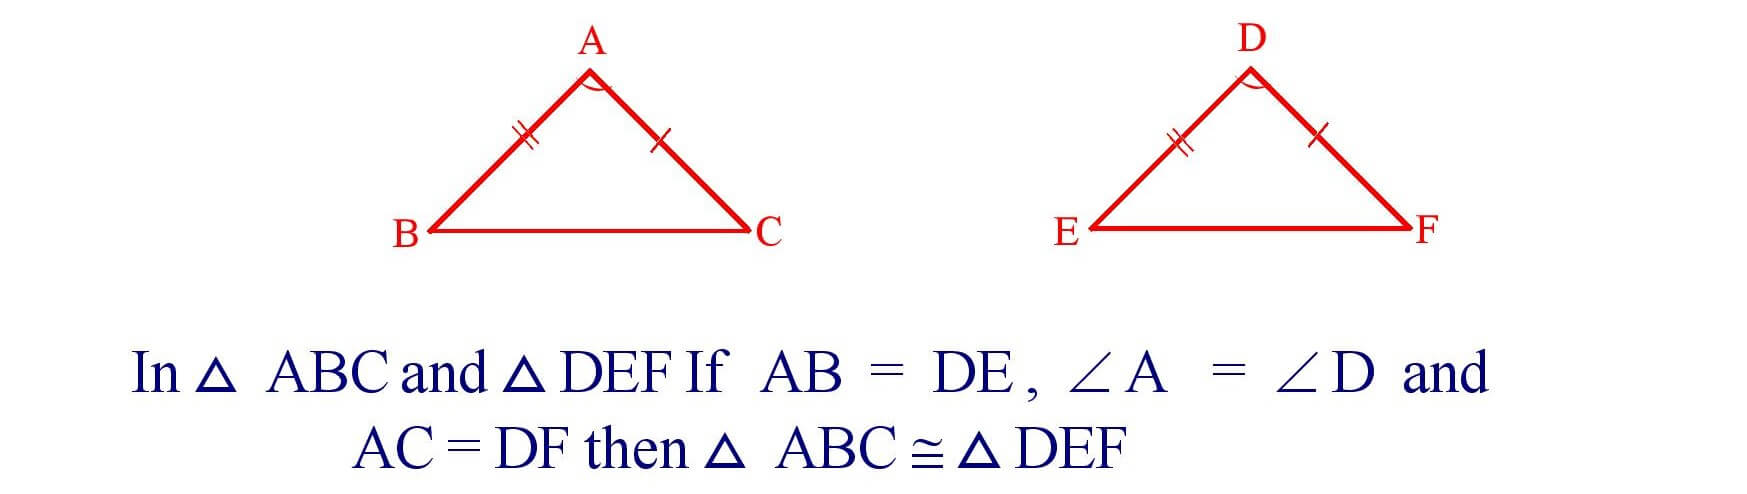 S - A - S  Congruence of Triangle